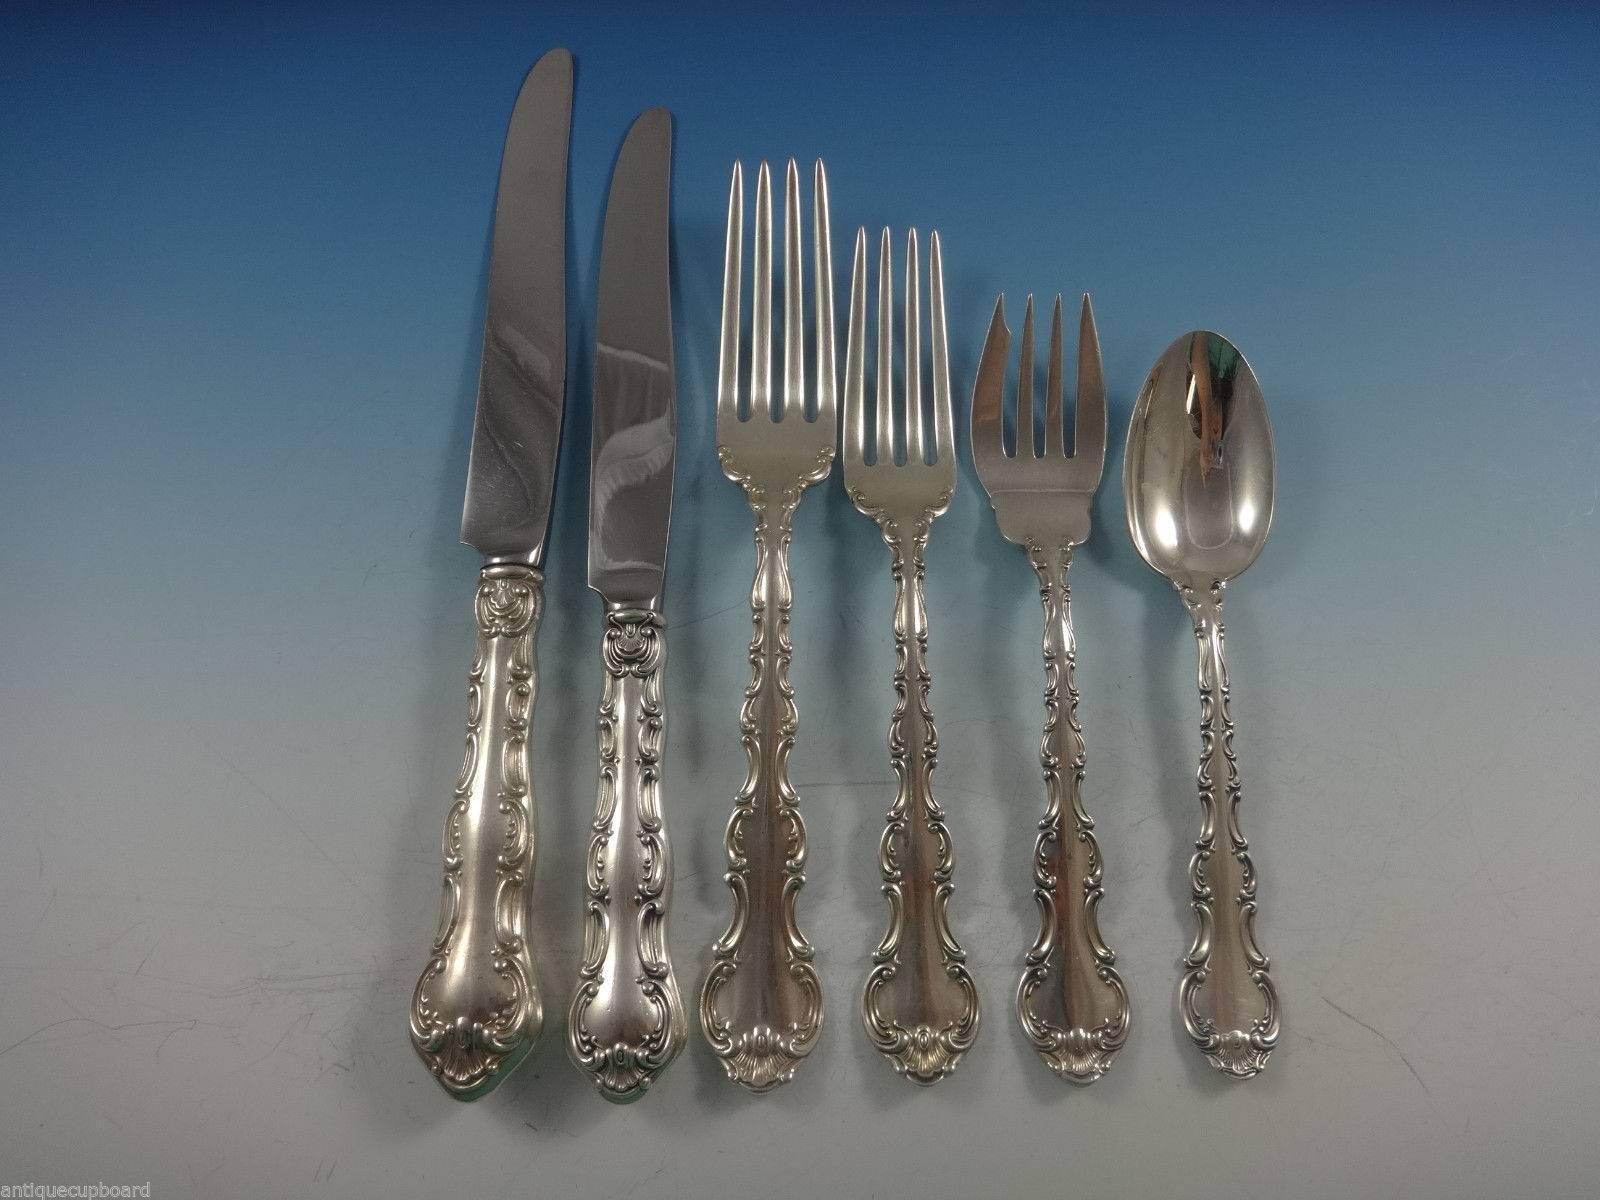 This set includes:

12 dinner size knives, 9 5/8".
12 dinner size forks, 7 5/8".
12 luncheon knives, 8 7/8".
12 luncheon forks, 7".
12 salad forks, 6 3/8".
12 teaspoons, 5 3/4".
One serving spoon, 8 1/2".
One cold